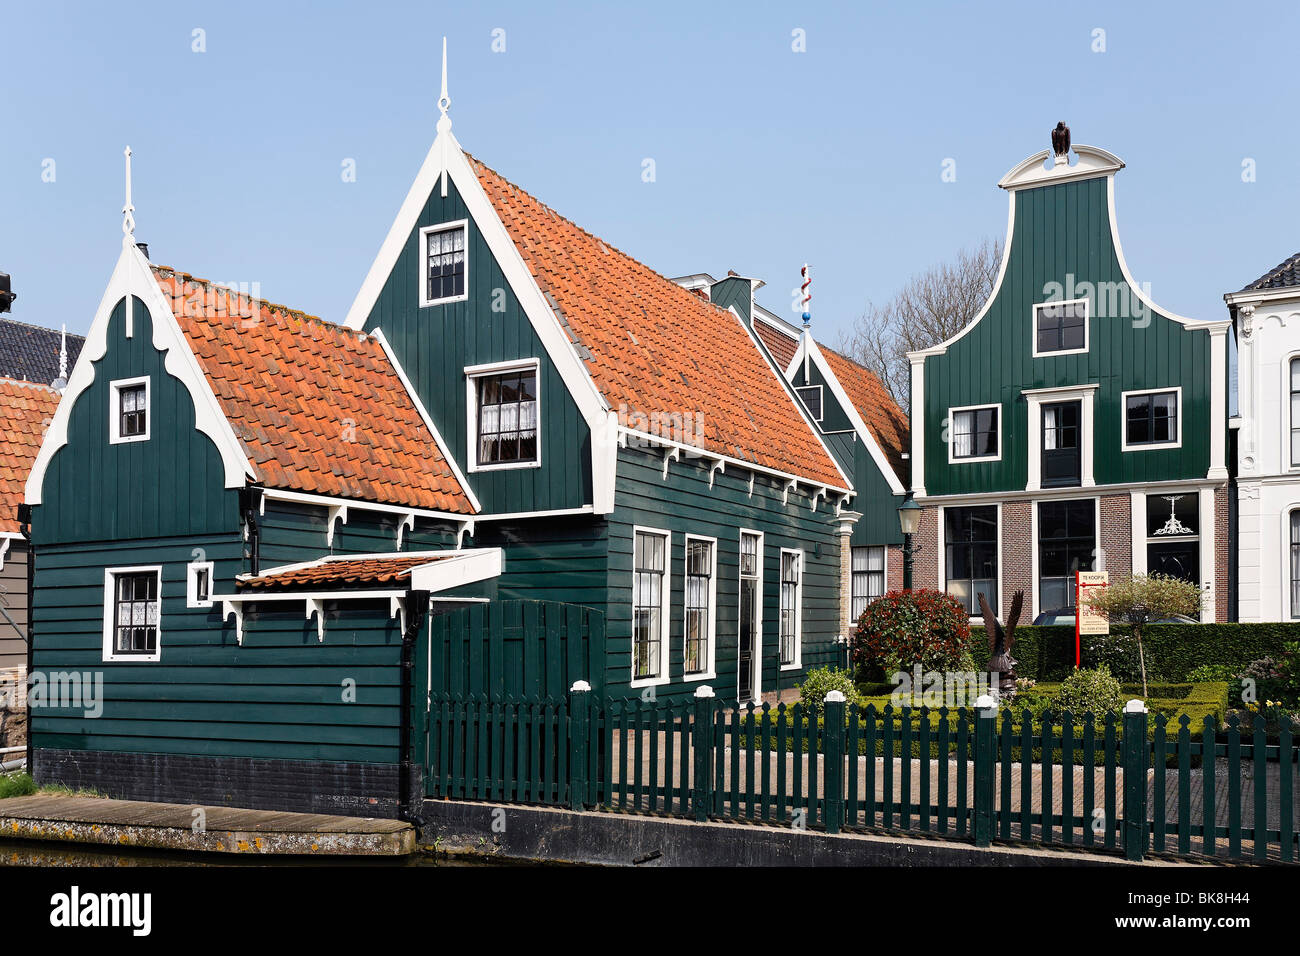 Typical wooden houses from the 17th century, historic city De Rijp near Alkmaar, Province of North Holland, Netherlands, Europe Stock Photo